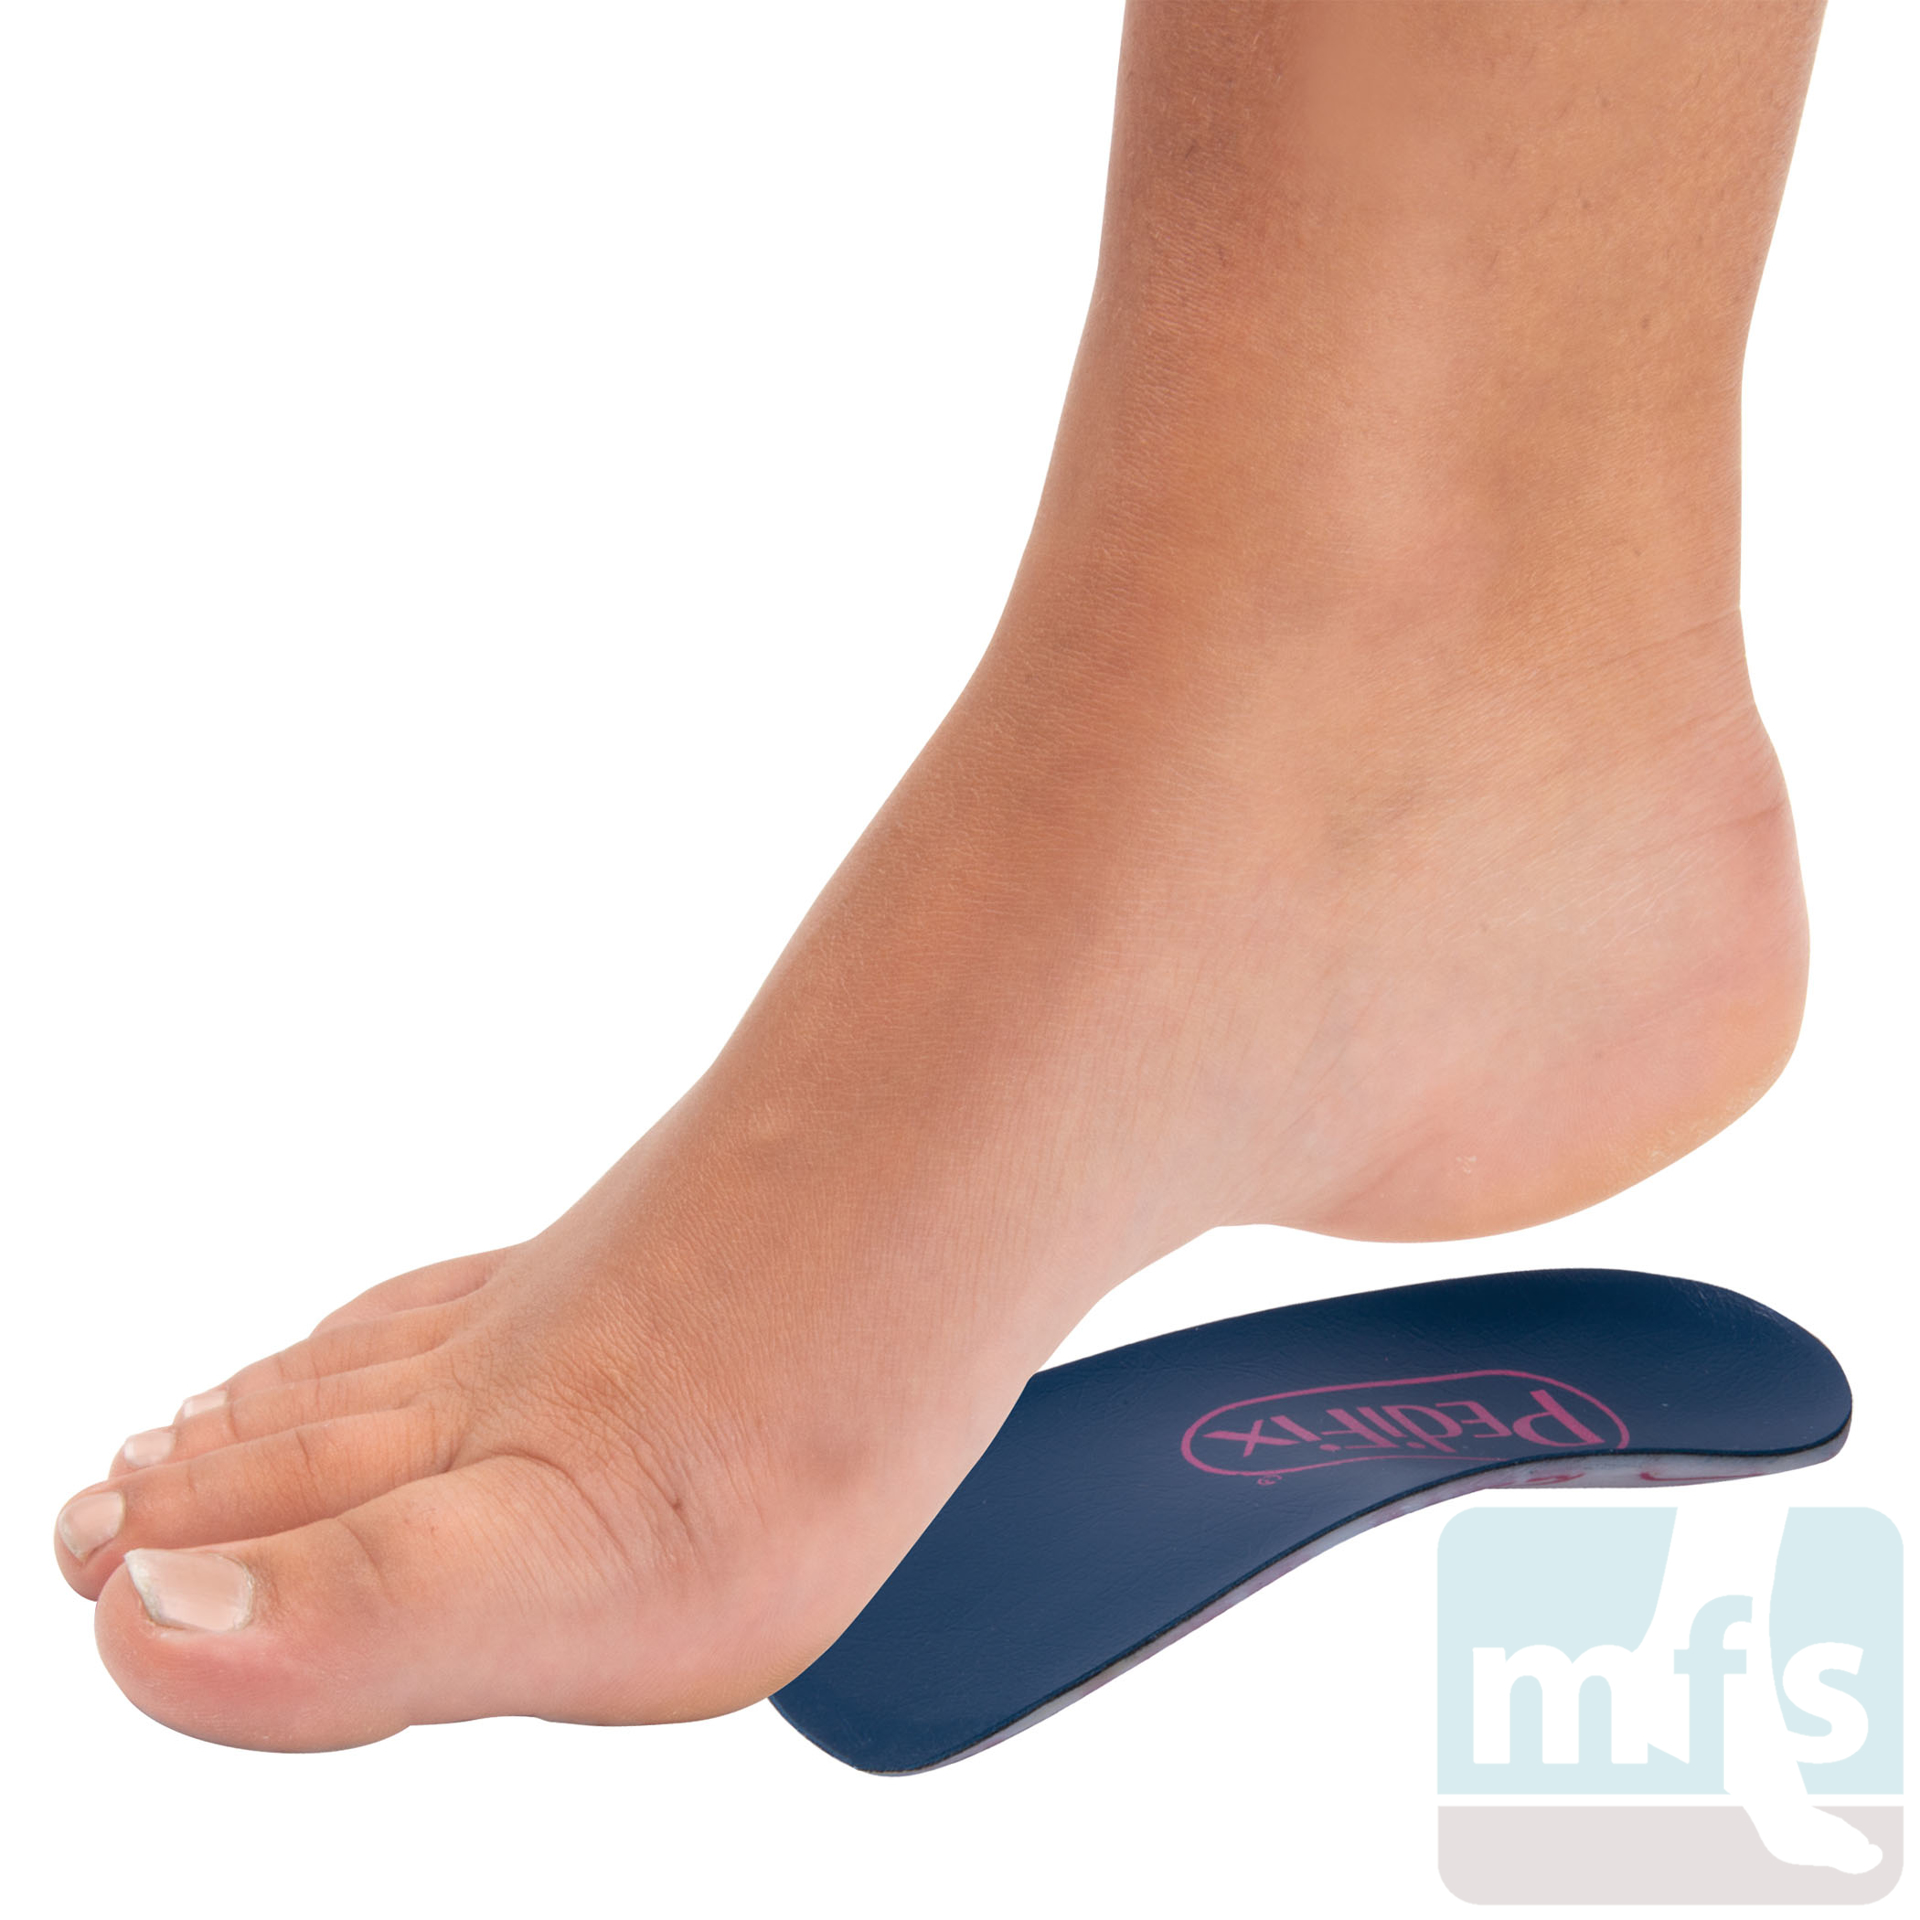 Natural Foot Orthotic Cushions Perfect to be worn over Orthotic